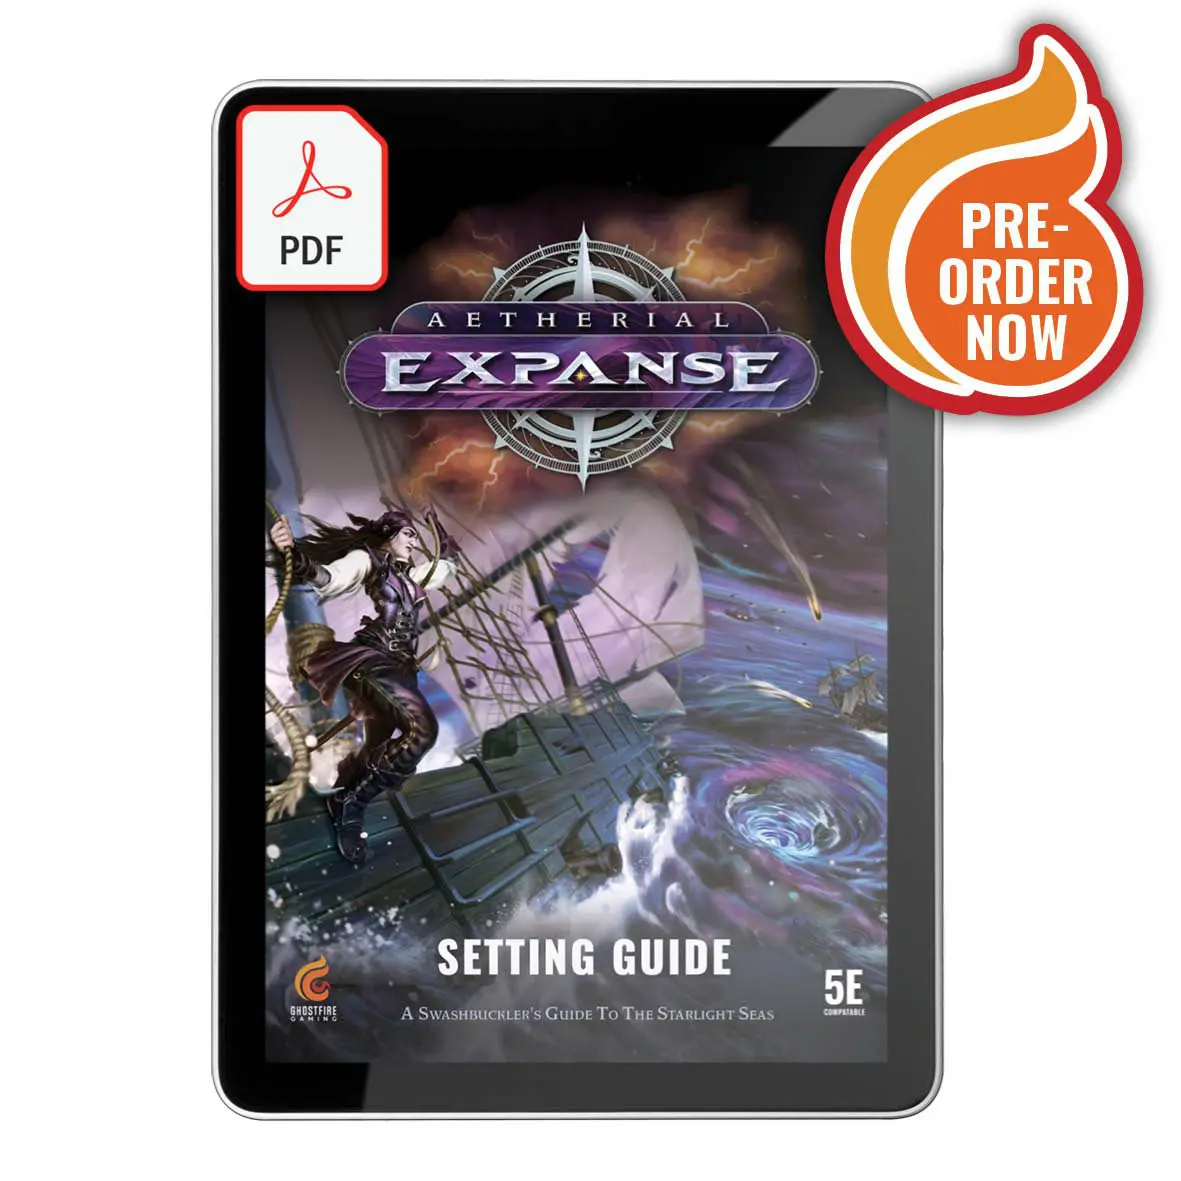 Aetherial Expanse: Setting Guide [PDF]